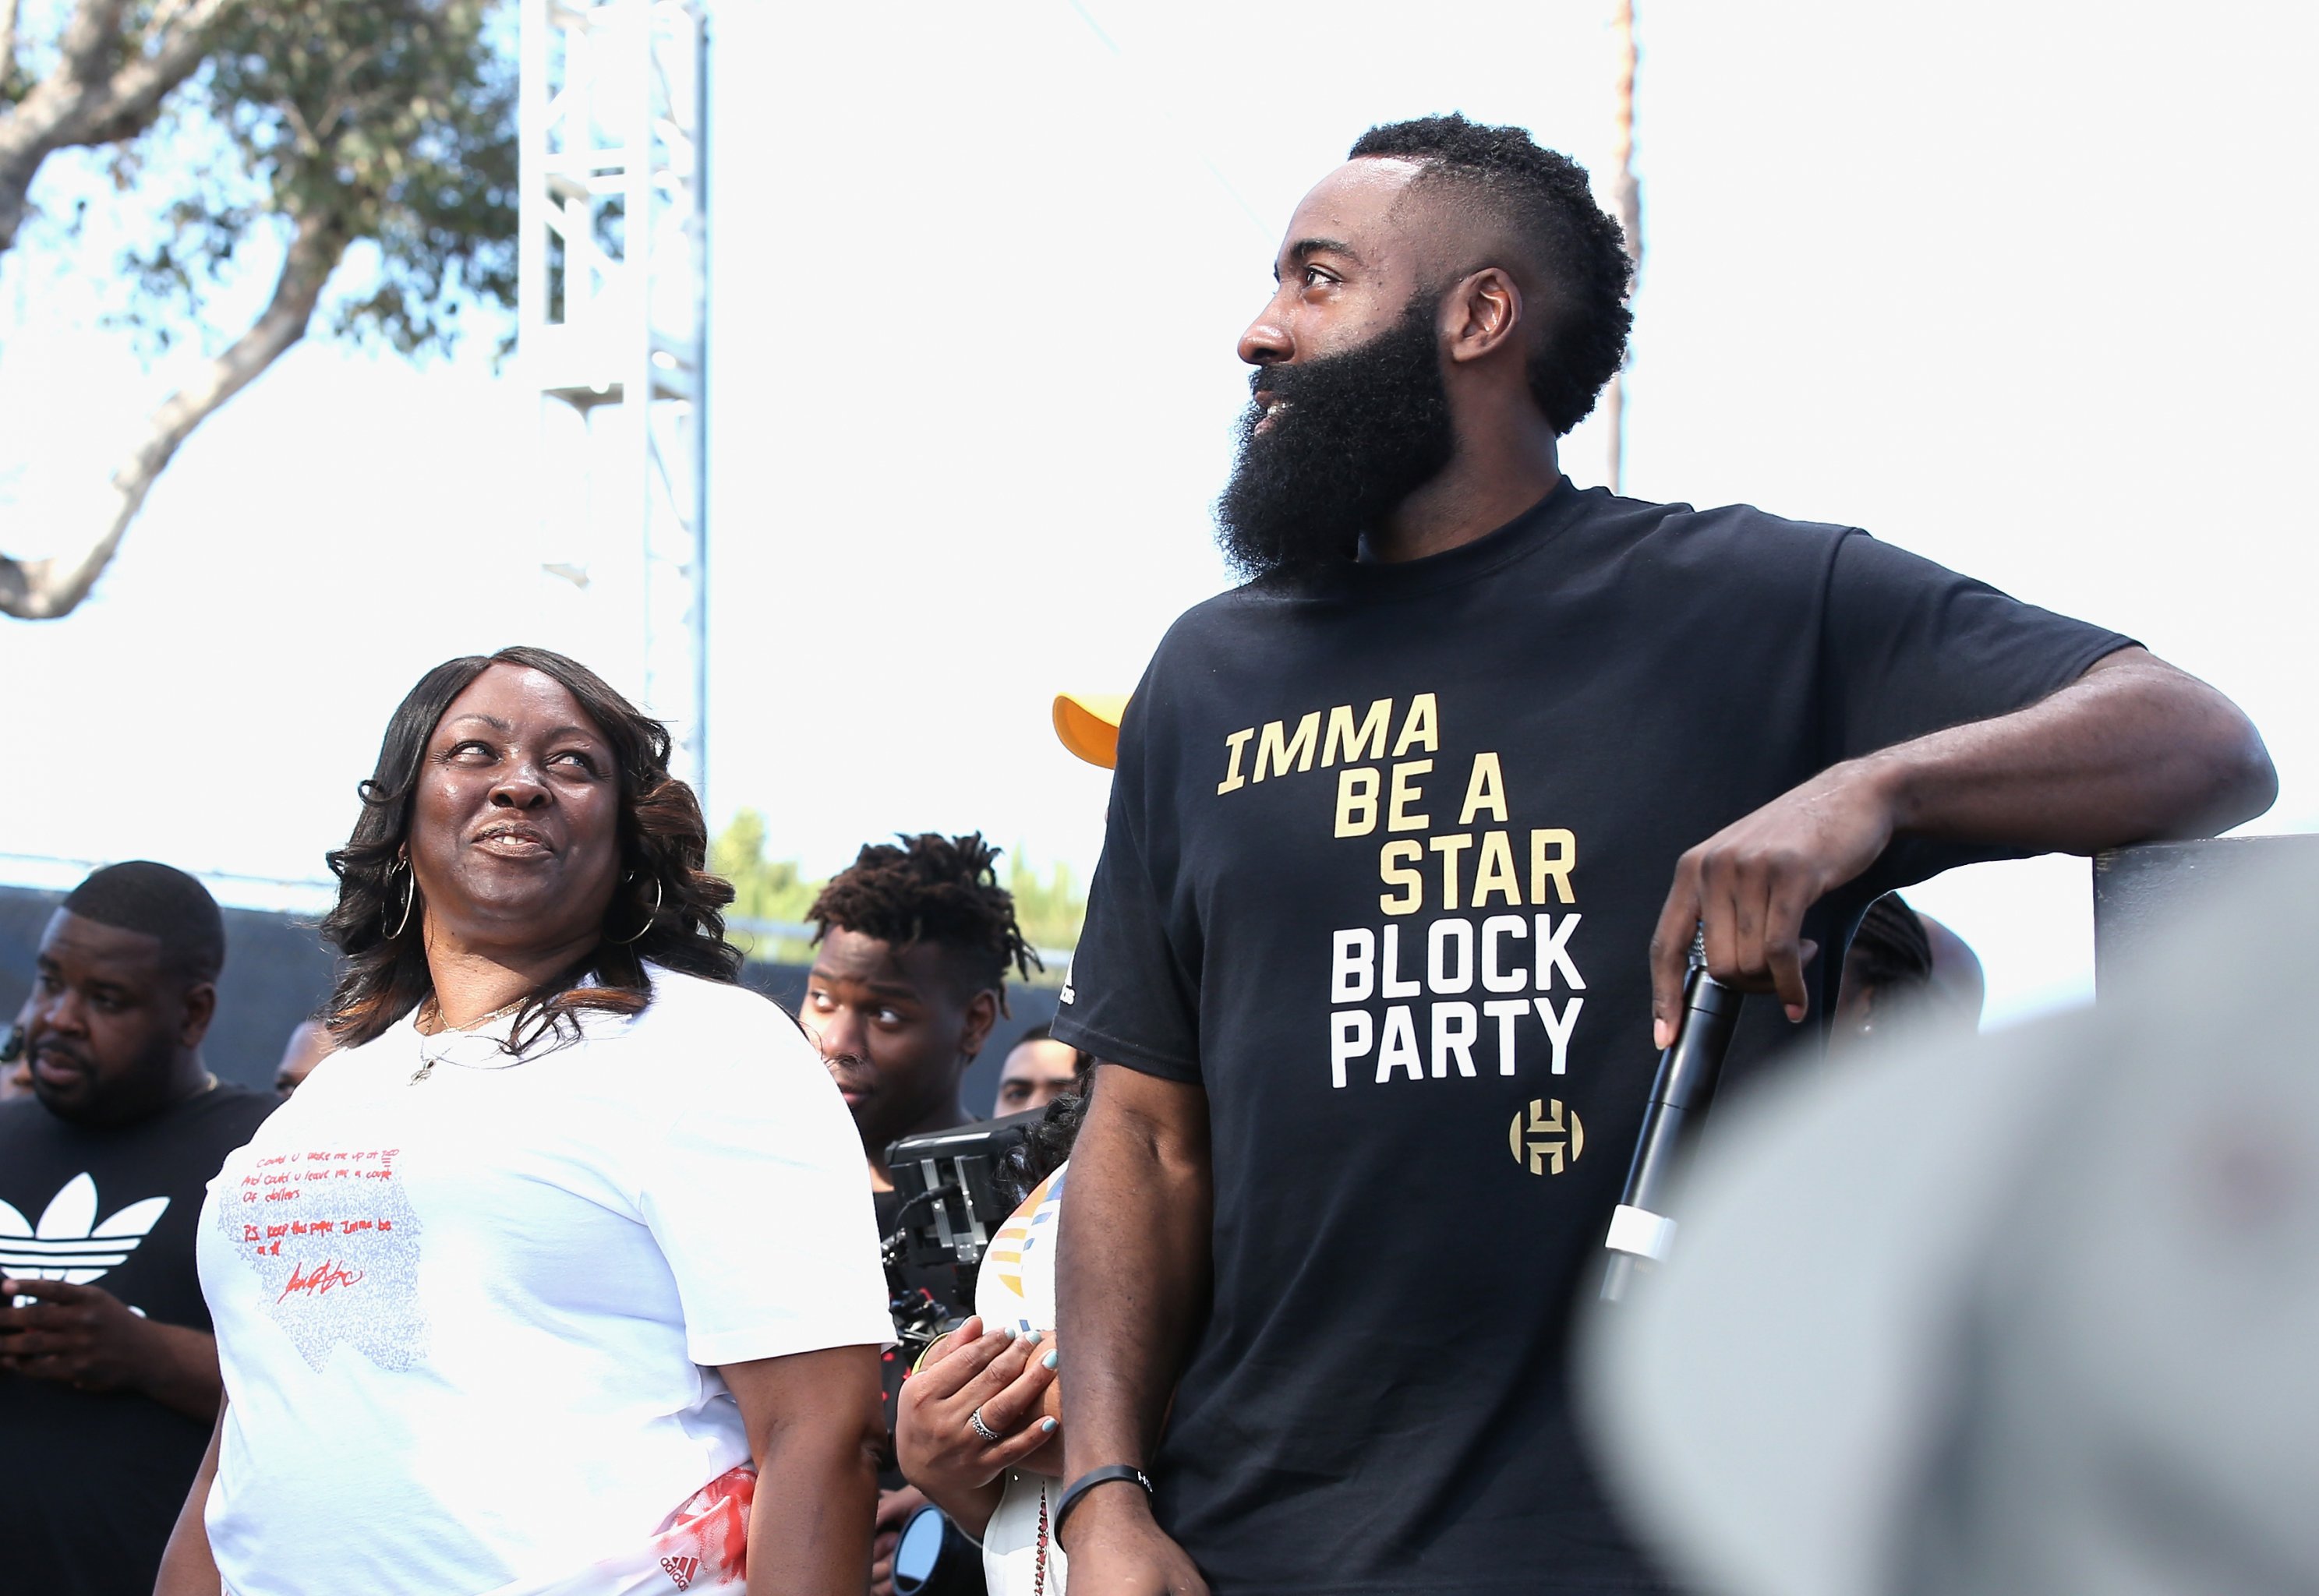 A special surprise from James Harden's mom 